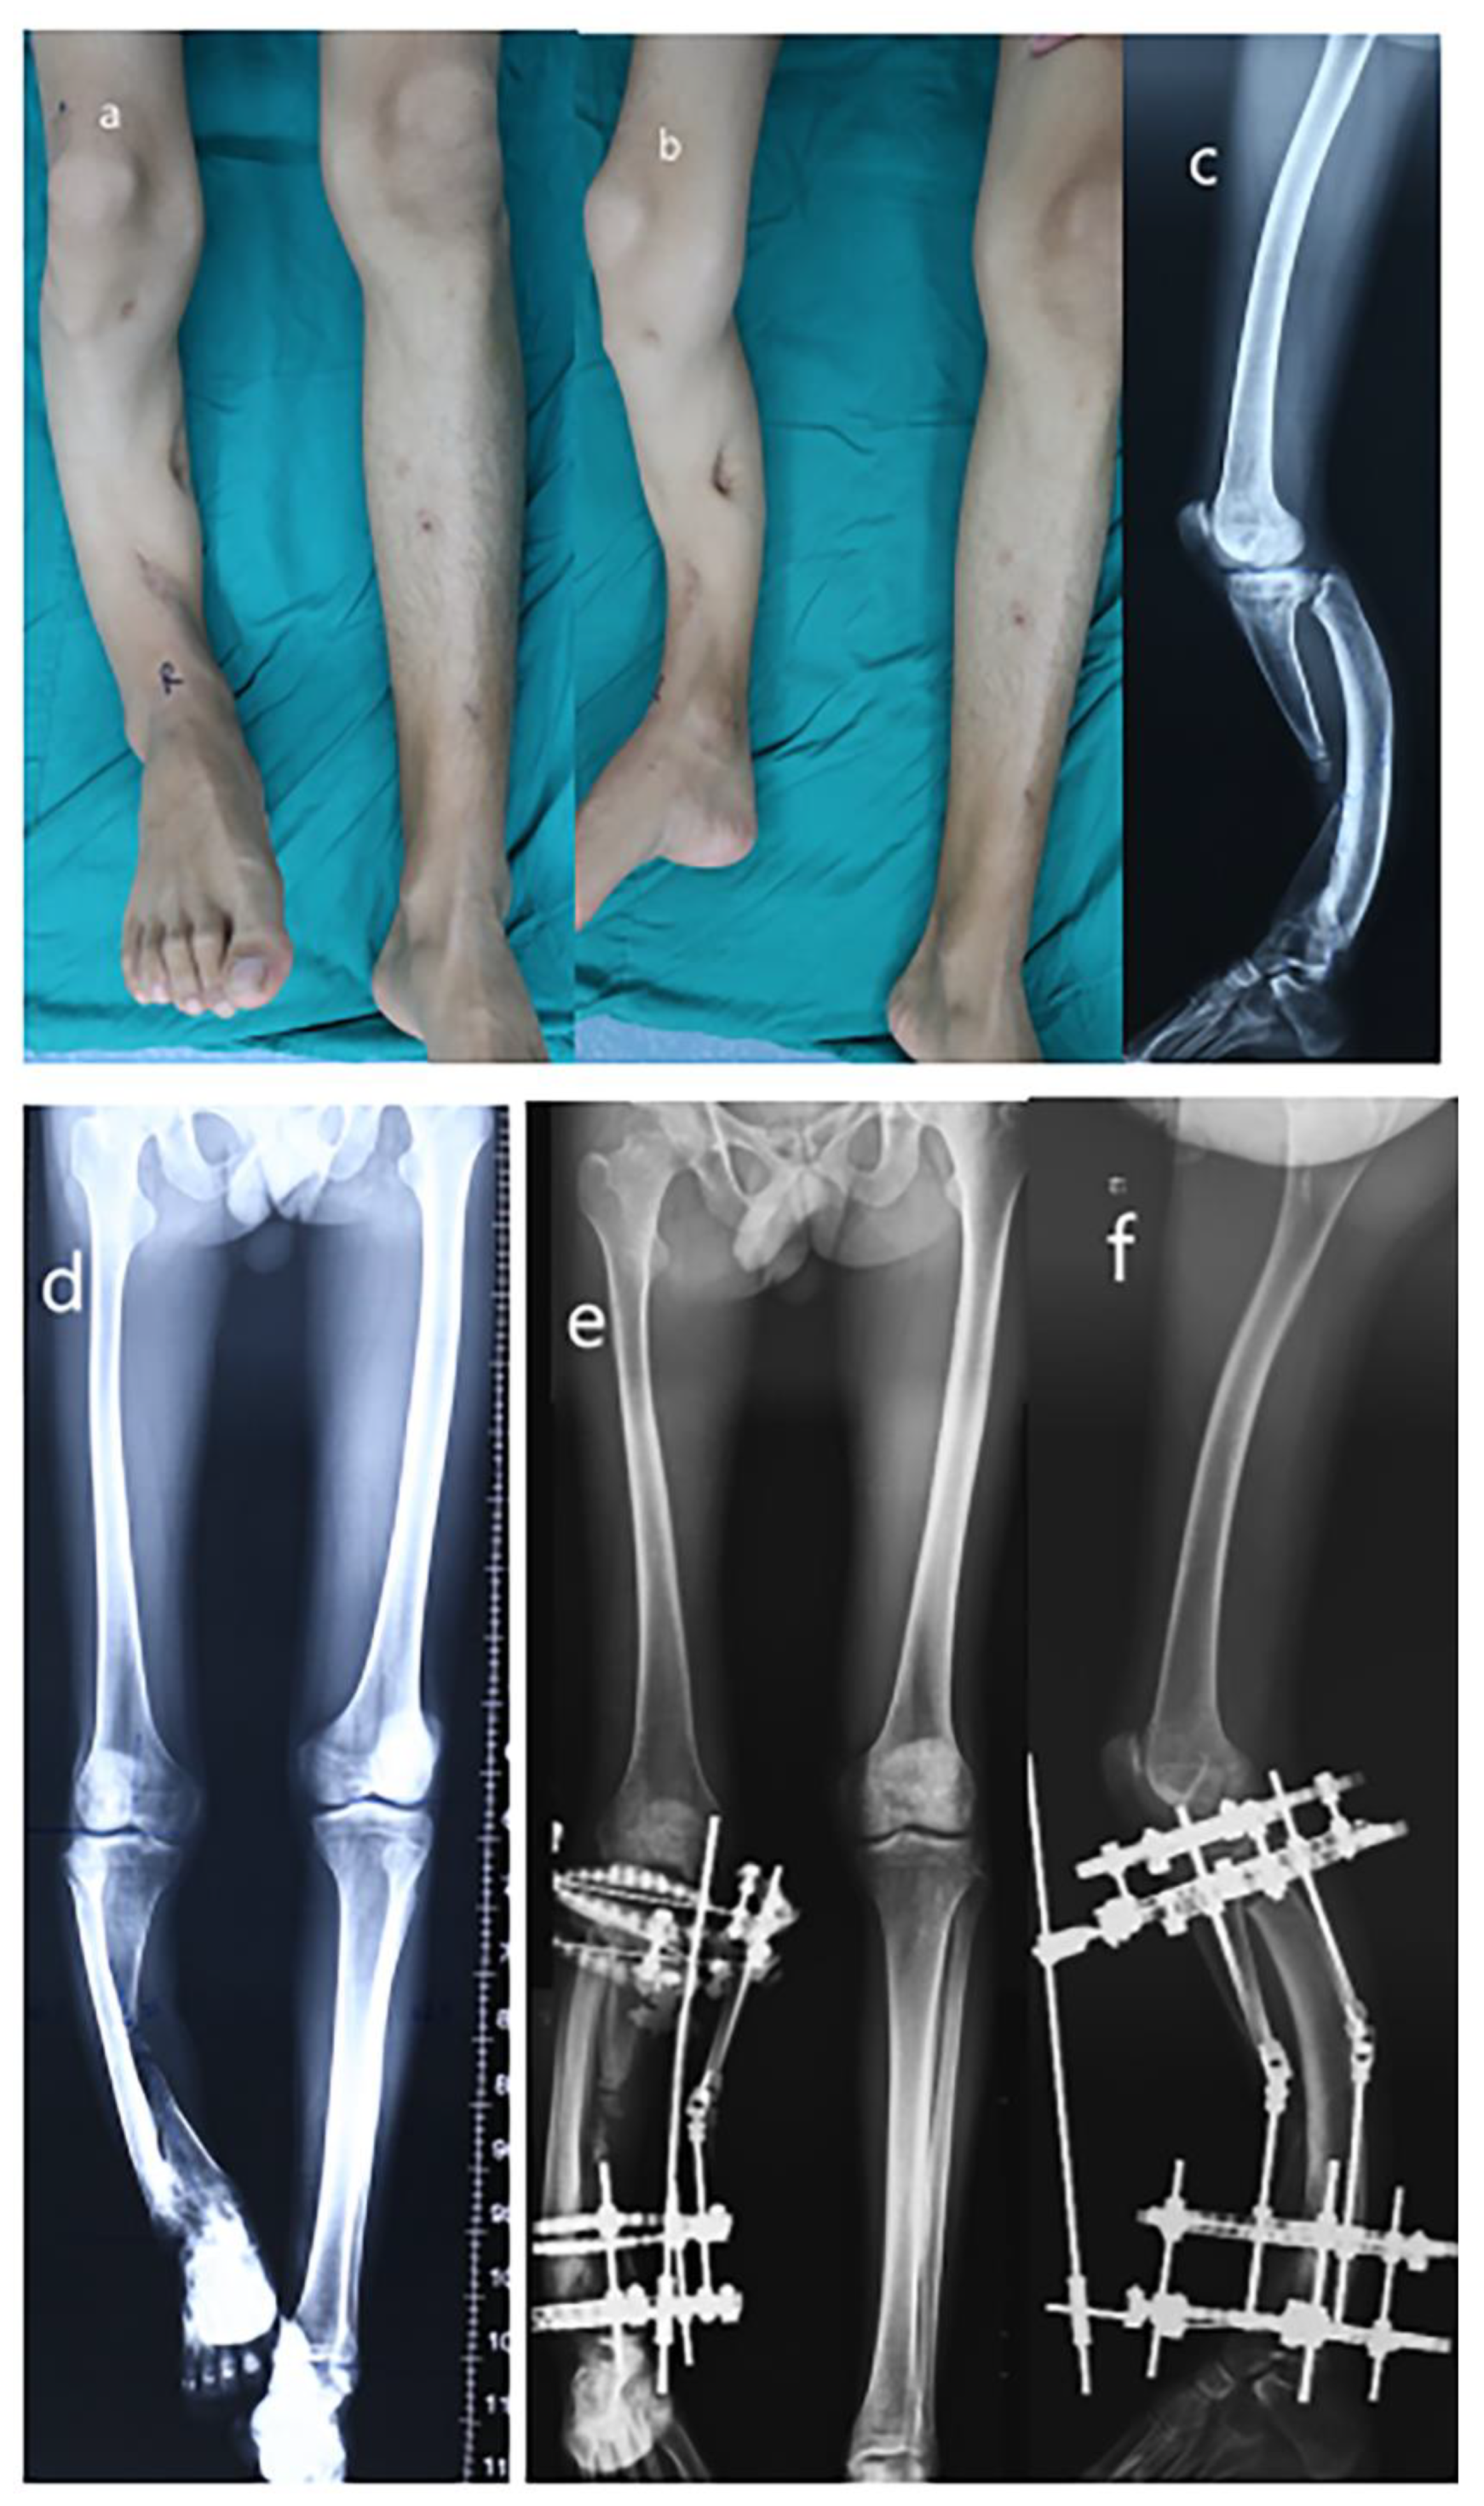 Analysis of bone transport for ankle arthrodesis as a limb salvage